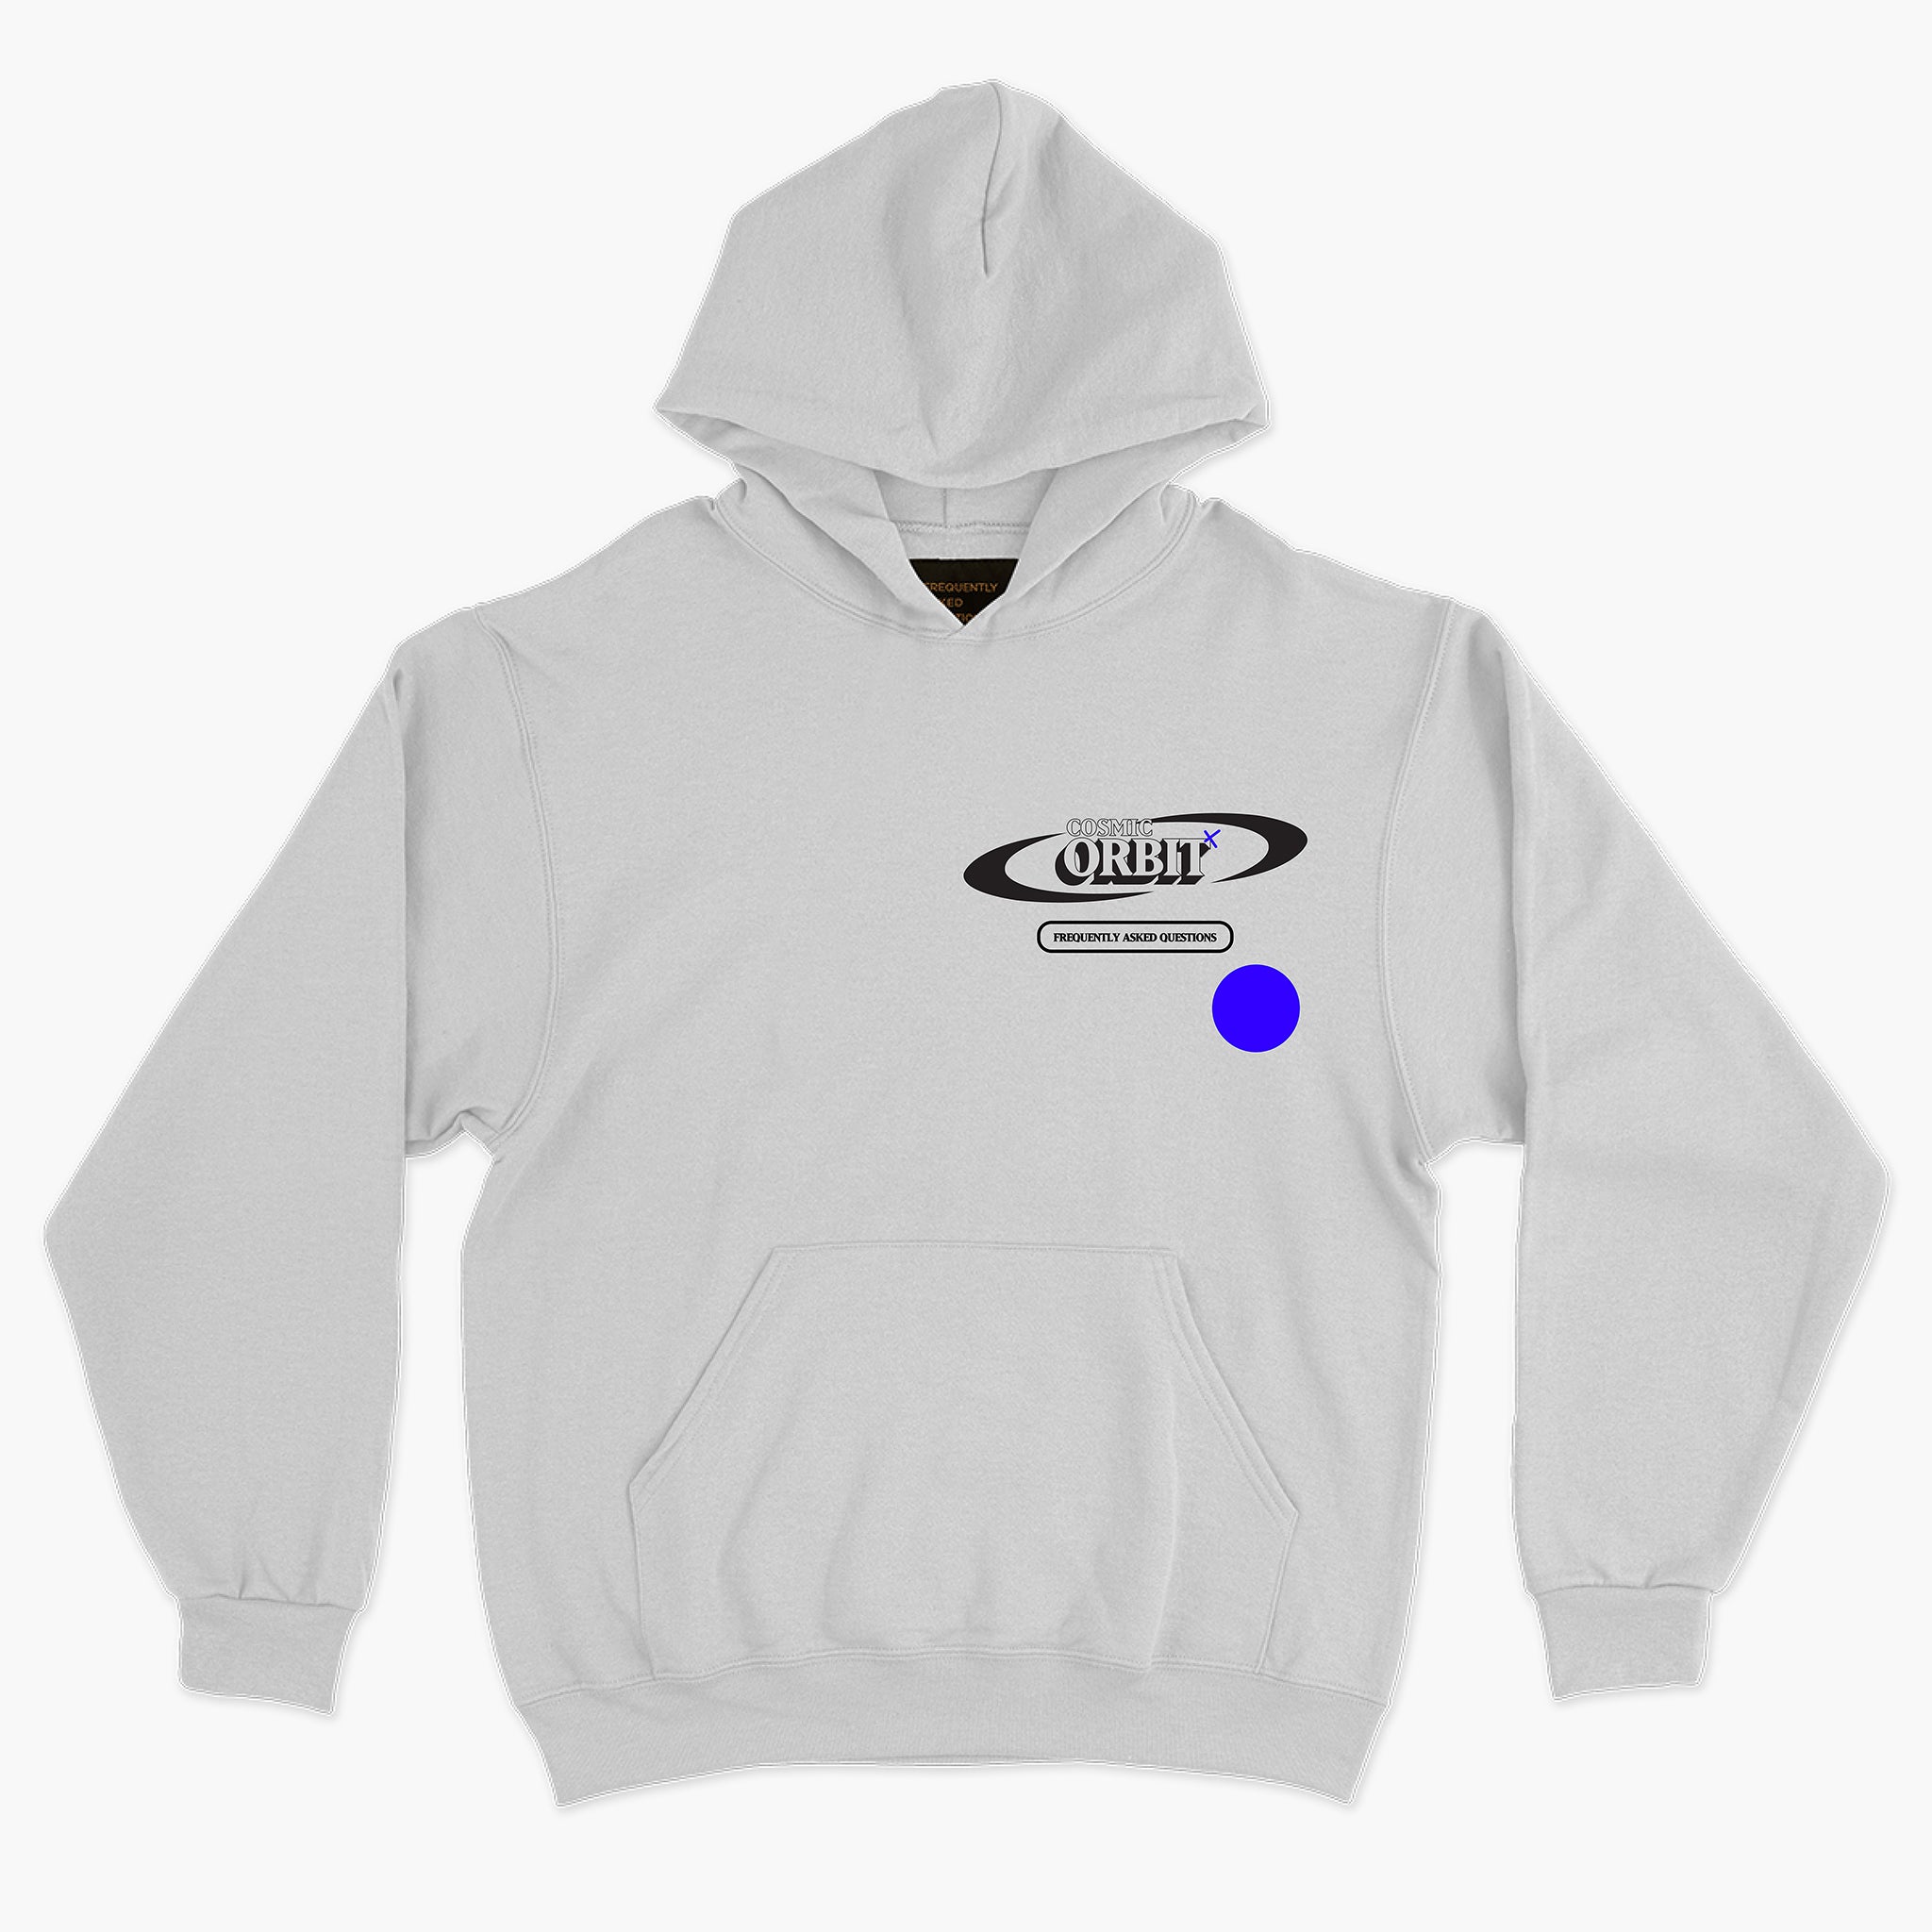 Infinite Orbit Hoodie - Frequently Asked Questions